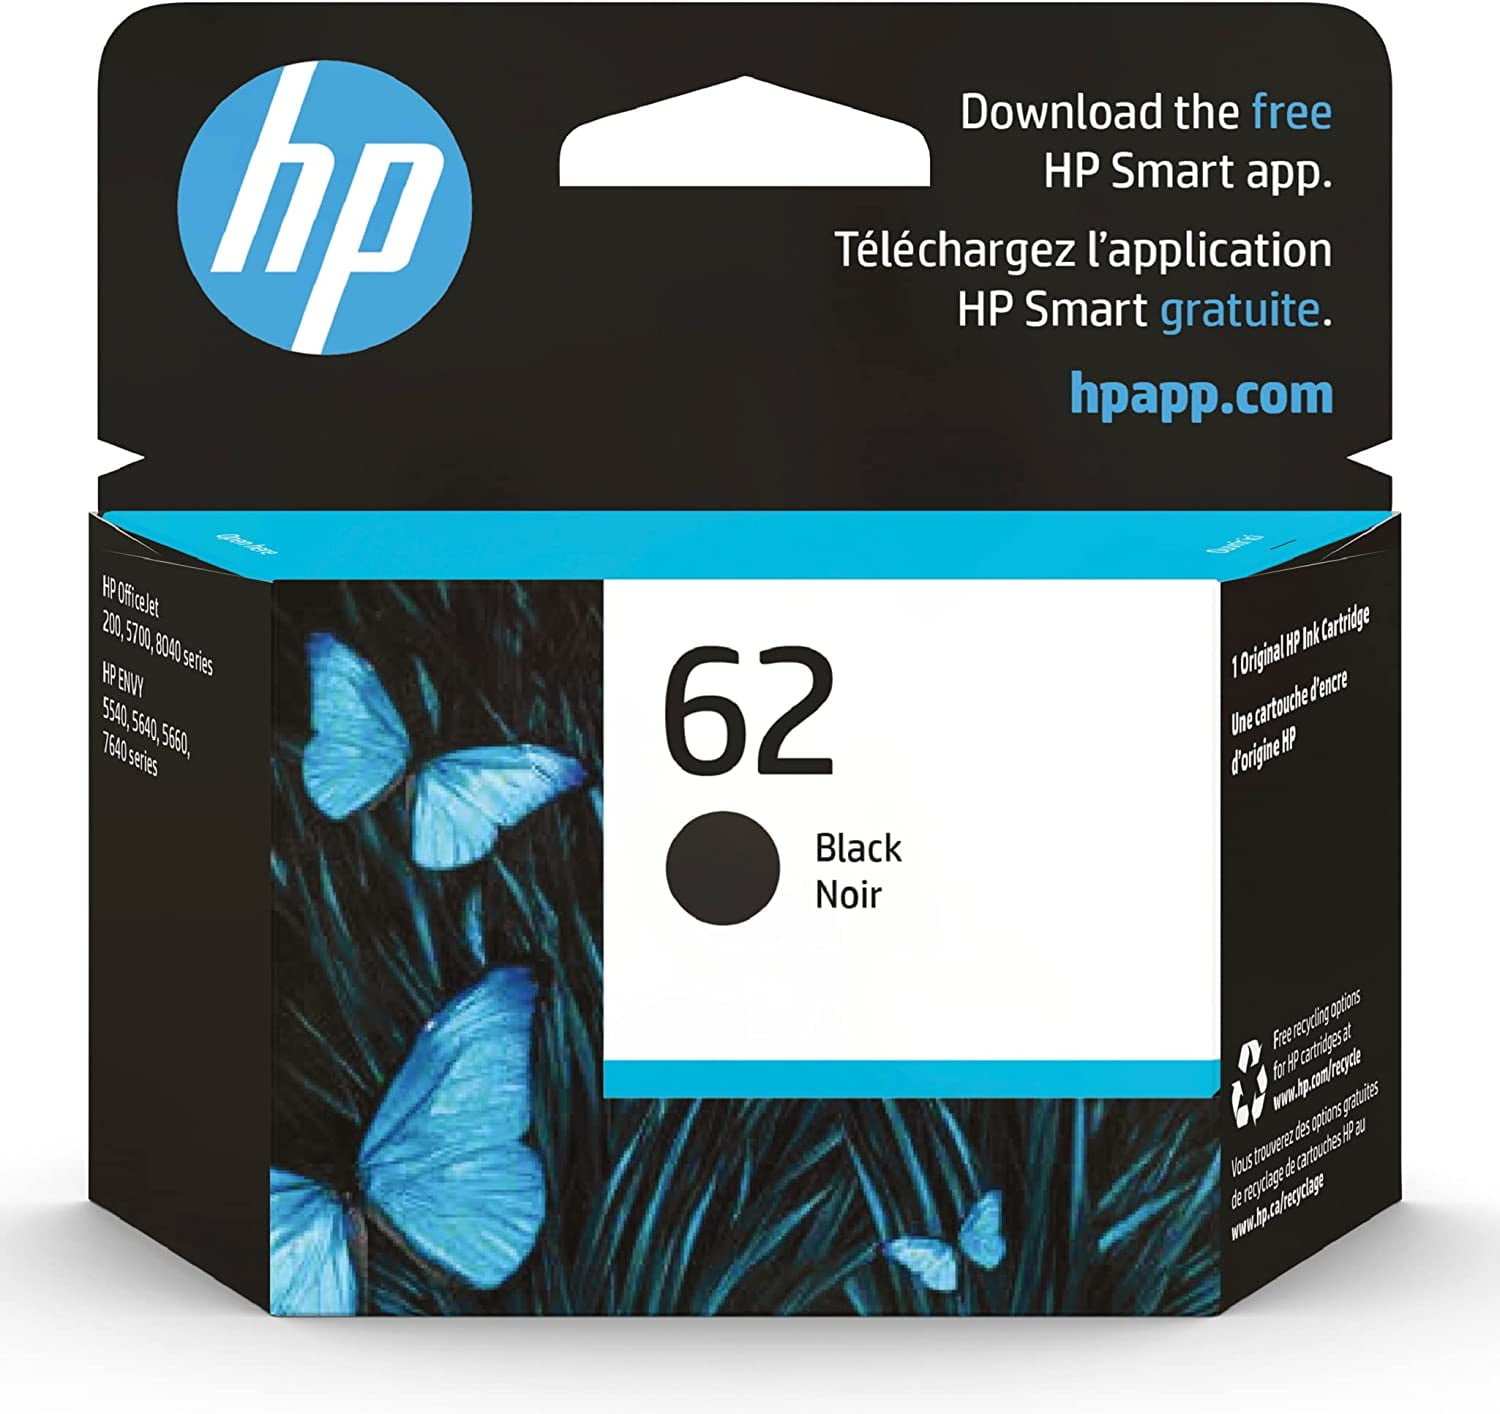 HP 62 Black Cartridge | Works with HP ENVY 5540, 5640, 5660, 7640 Series, HP OfficeJet 5740, 8040 Series, OfficeJet Mobile 200, 250 | Eligible for Instant Ink | C2P04AN - Walmart.com